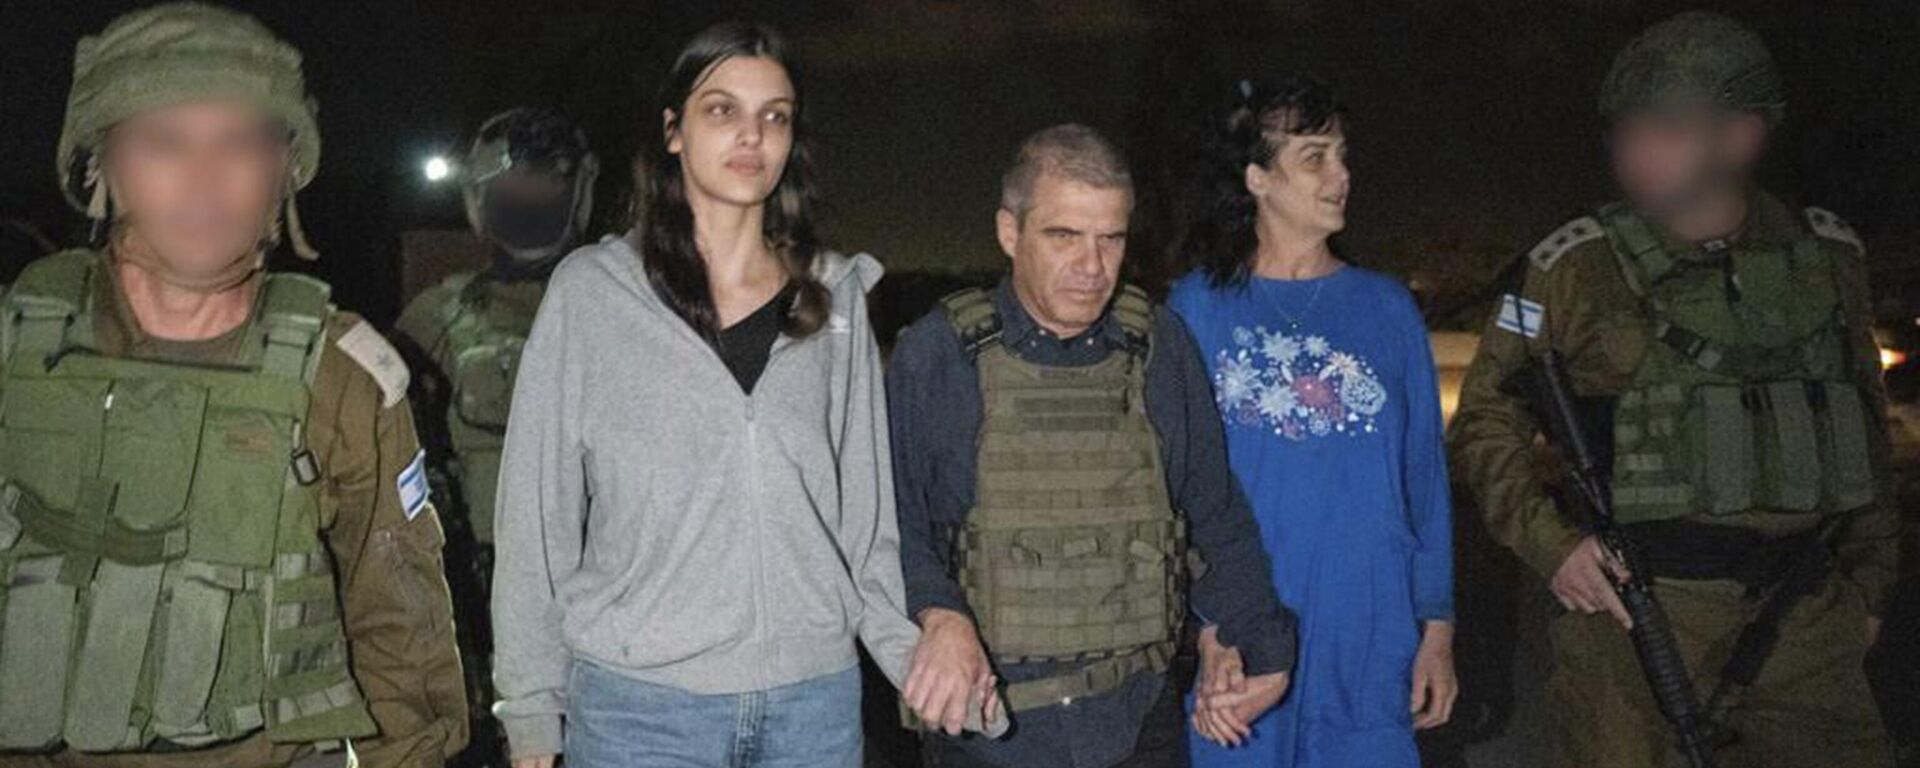 In this photo provided by the Government of Israel, Judith Raanan, right, and her 17-year-old daughter Natalie are escorted by Israeli soldiers and Gal Hirsch, Prime Minister Benjamin Netanyahu's special coordinator for returning the hostages, as they return to Israel from captivity in the Gaza Strip, Friday, Oct. 20, 2023. Hamas released the pair in what it said was a goodwill gesture late Friday, nearly two weeks after they were captured in a bloody cross-border raid by the Islamic militant group. The Hamas attack sparked a war that is entering its third week, and Hamas is believed to still be holding some 200 people hostage. - Sputnik International, 1920, 20.10.2023